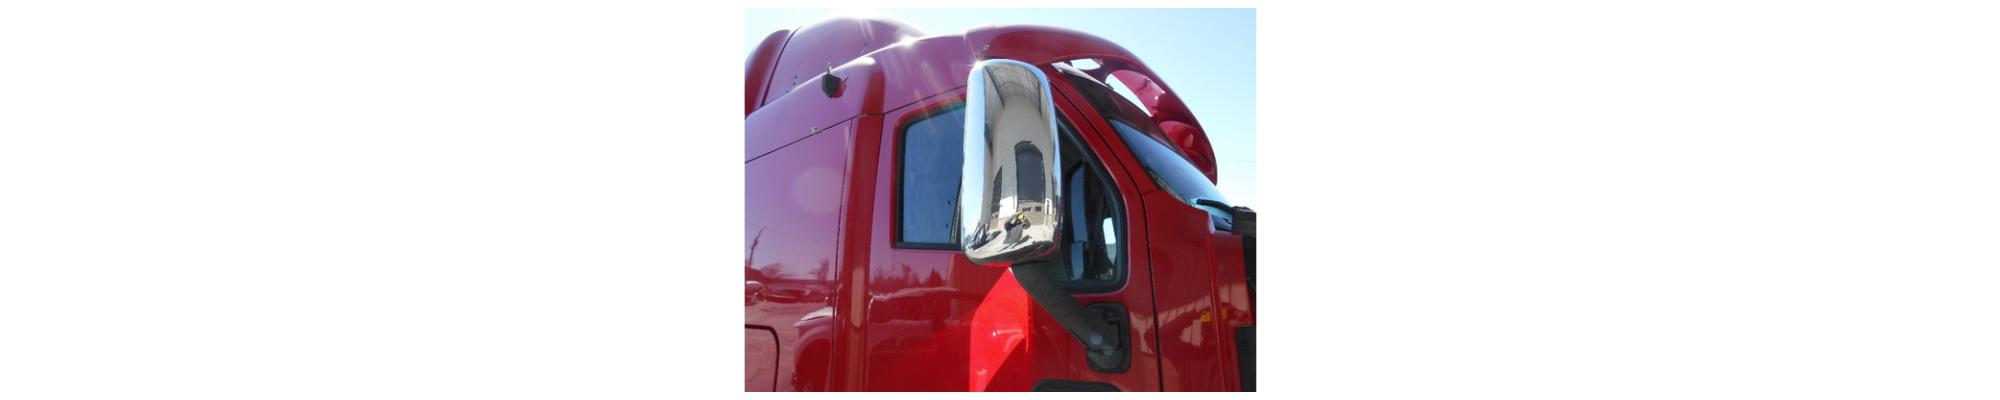 PETERBILT 389 Mirror (Side View) in MORRISVILLE, NY 5073